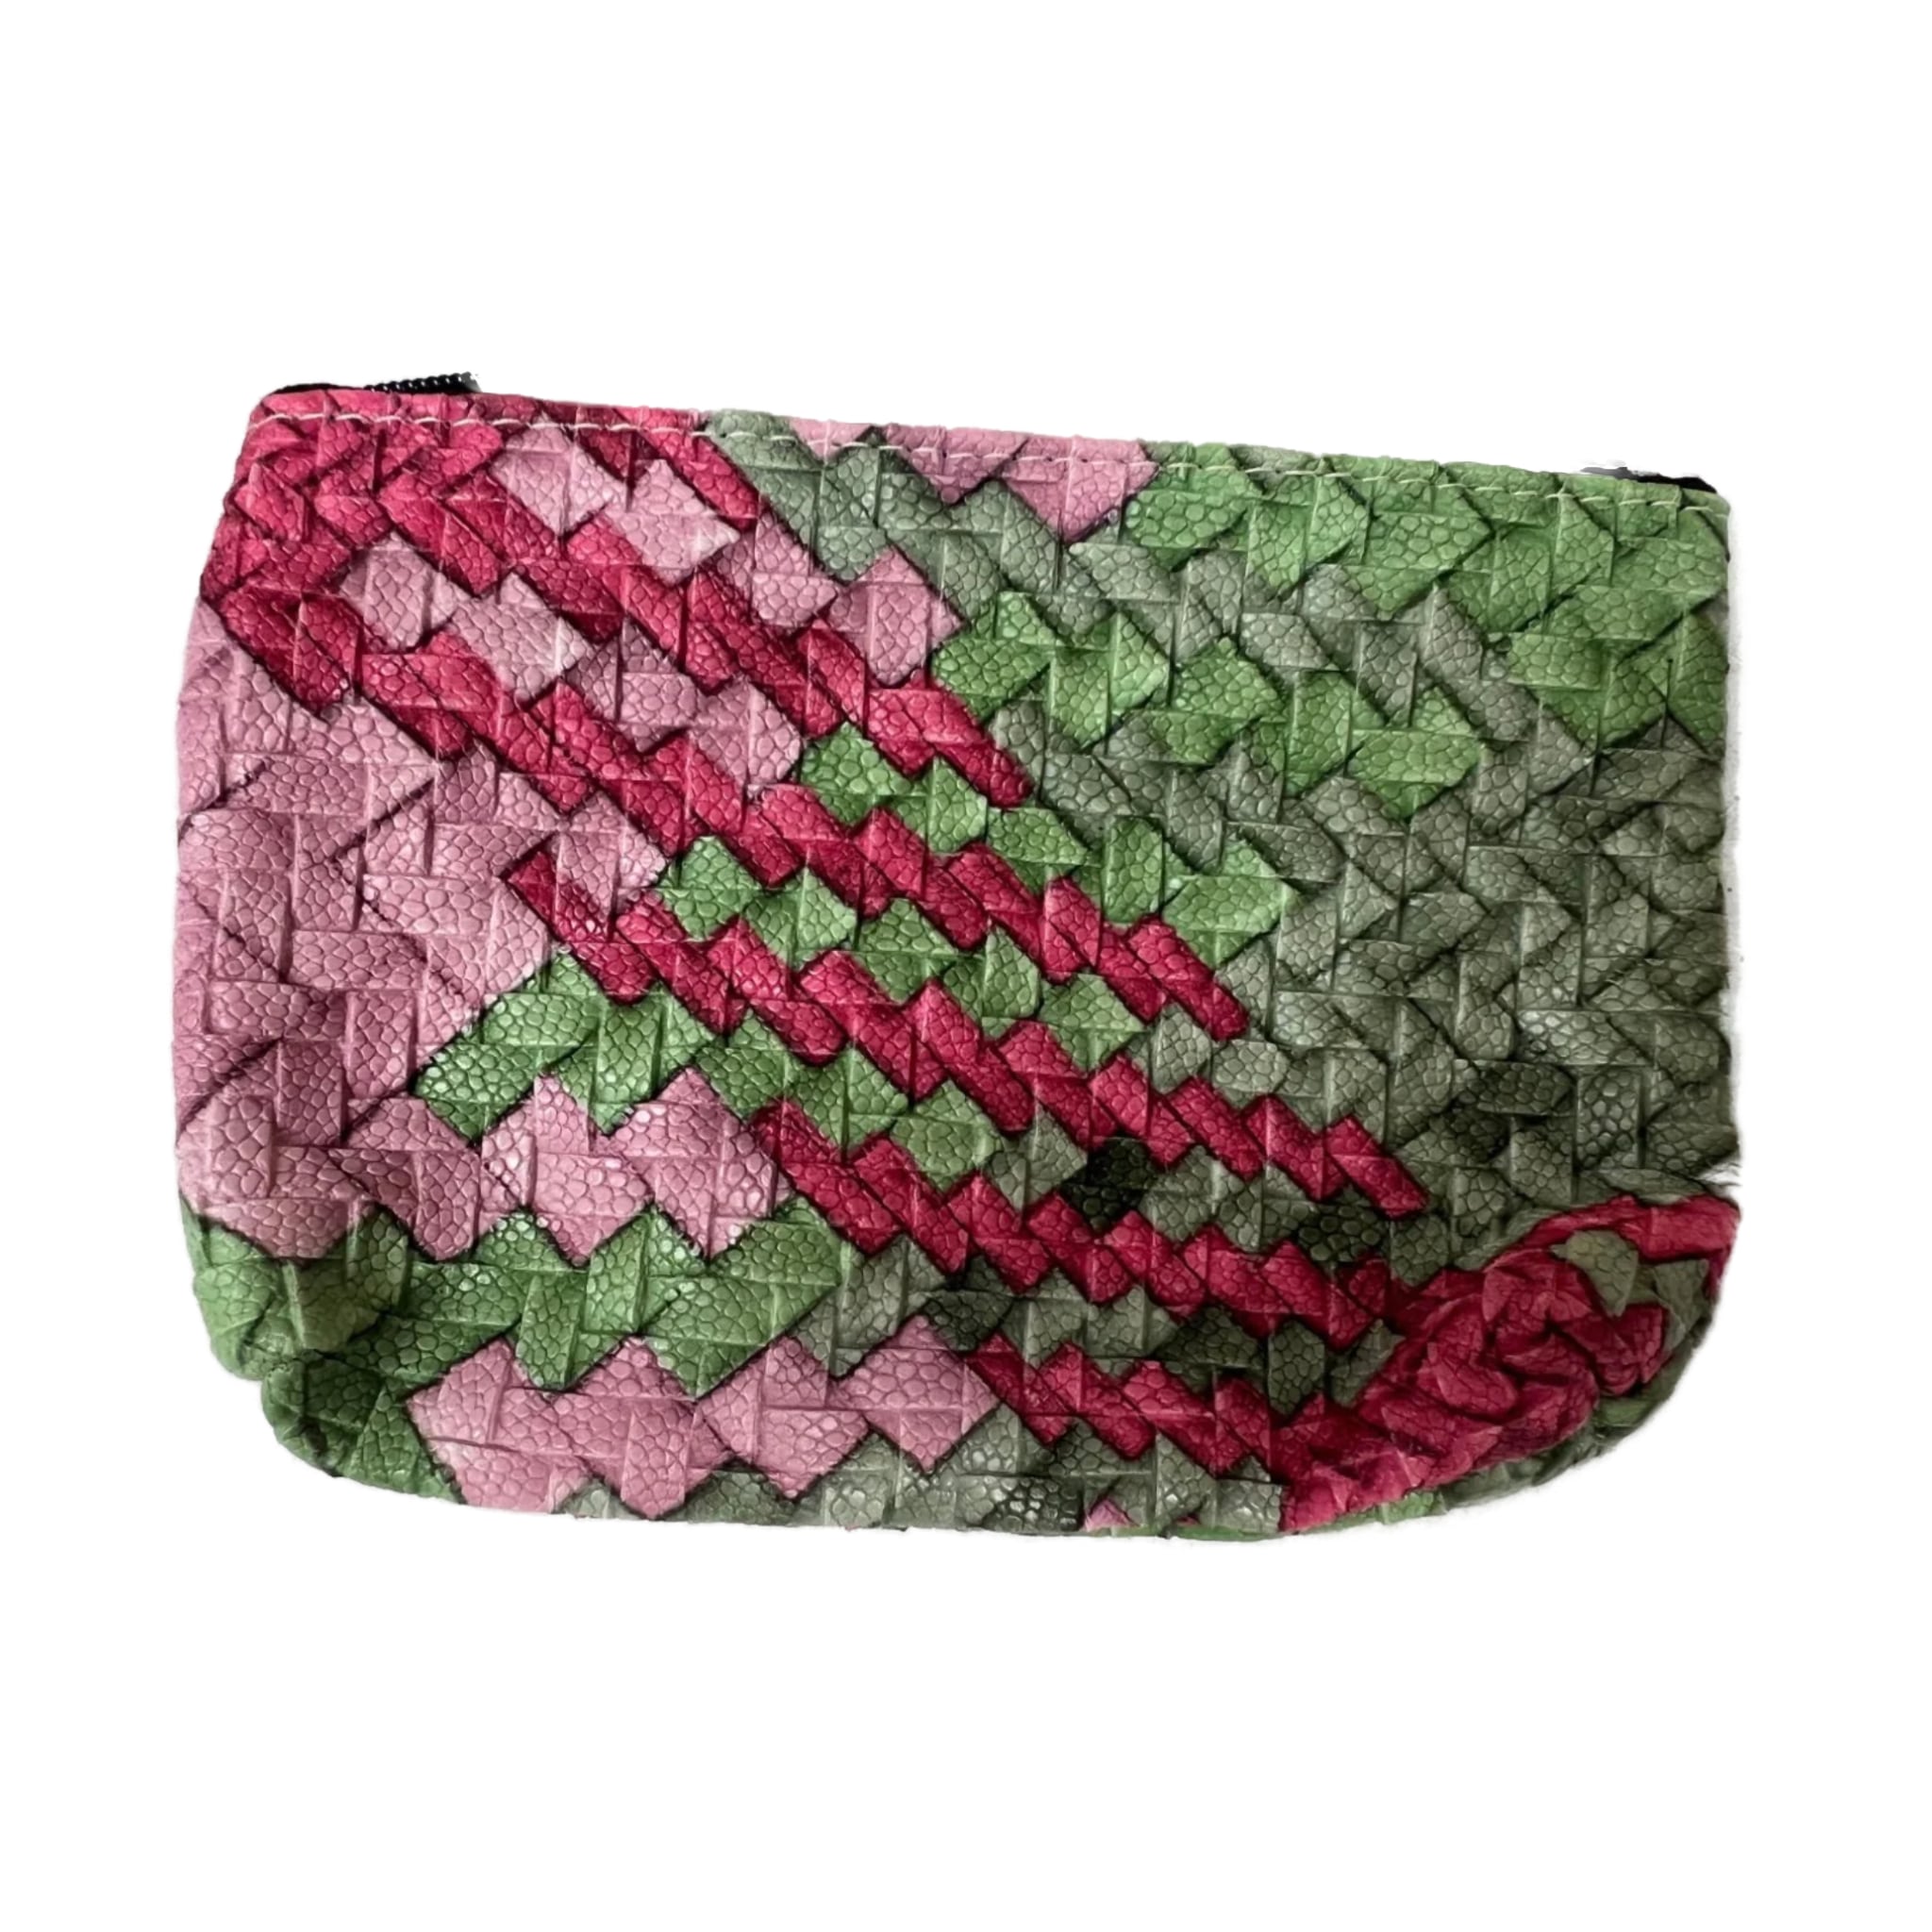 Woven coin bag in multiple colors 